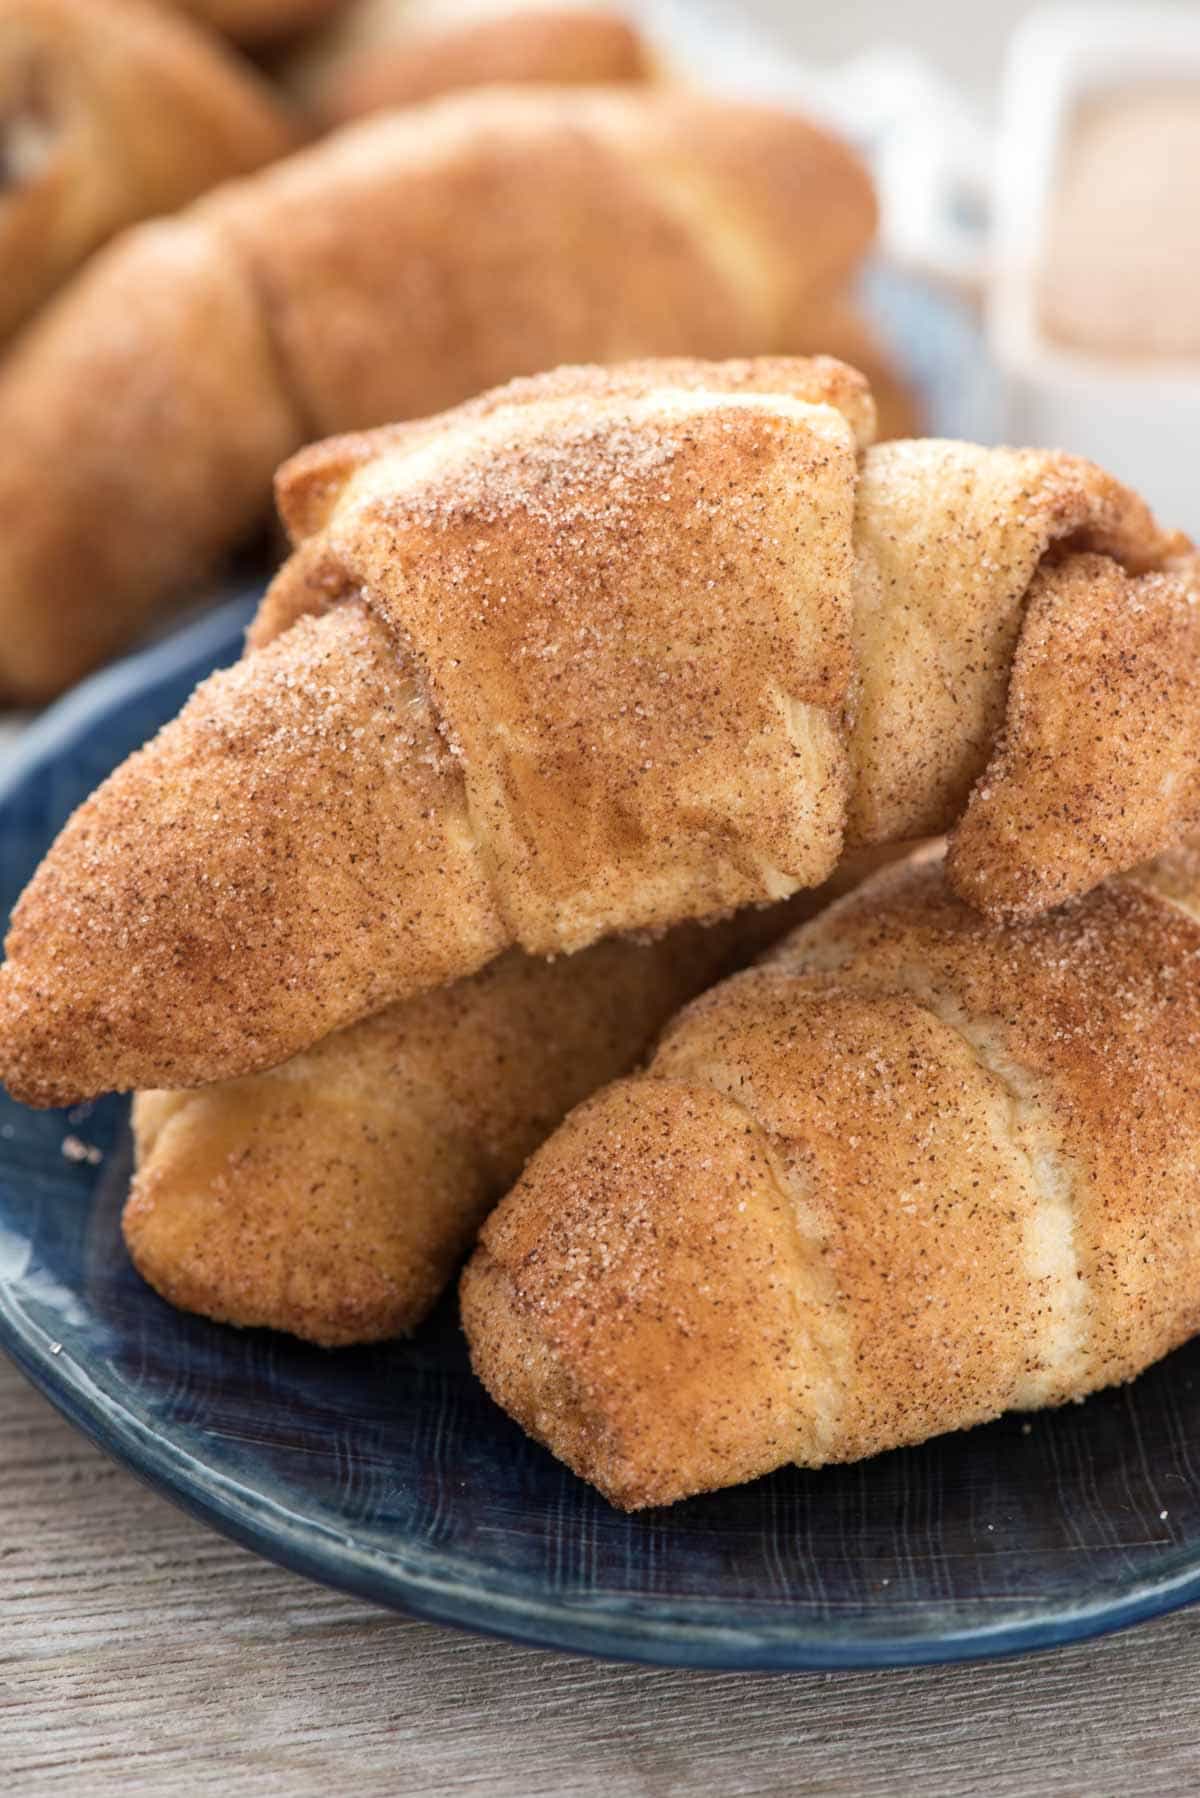 9 Things You Need To Know Before Eating Pillsbury Crescent Rolls